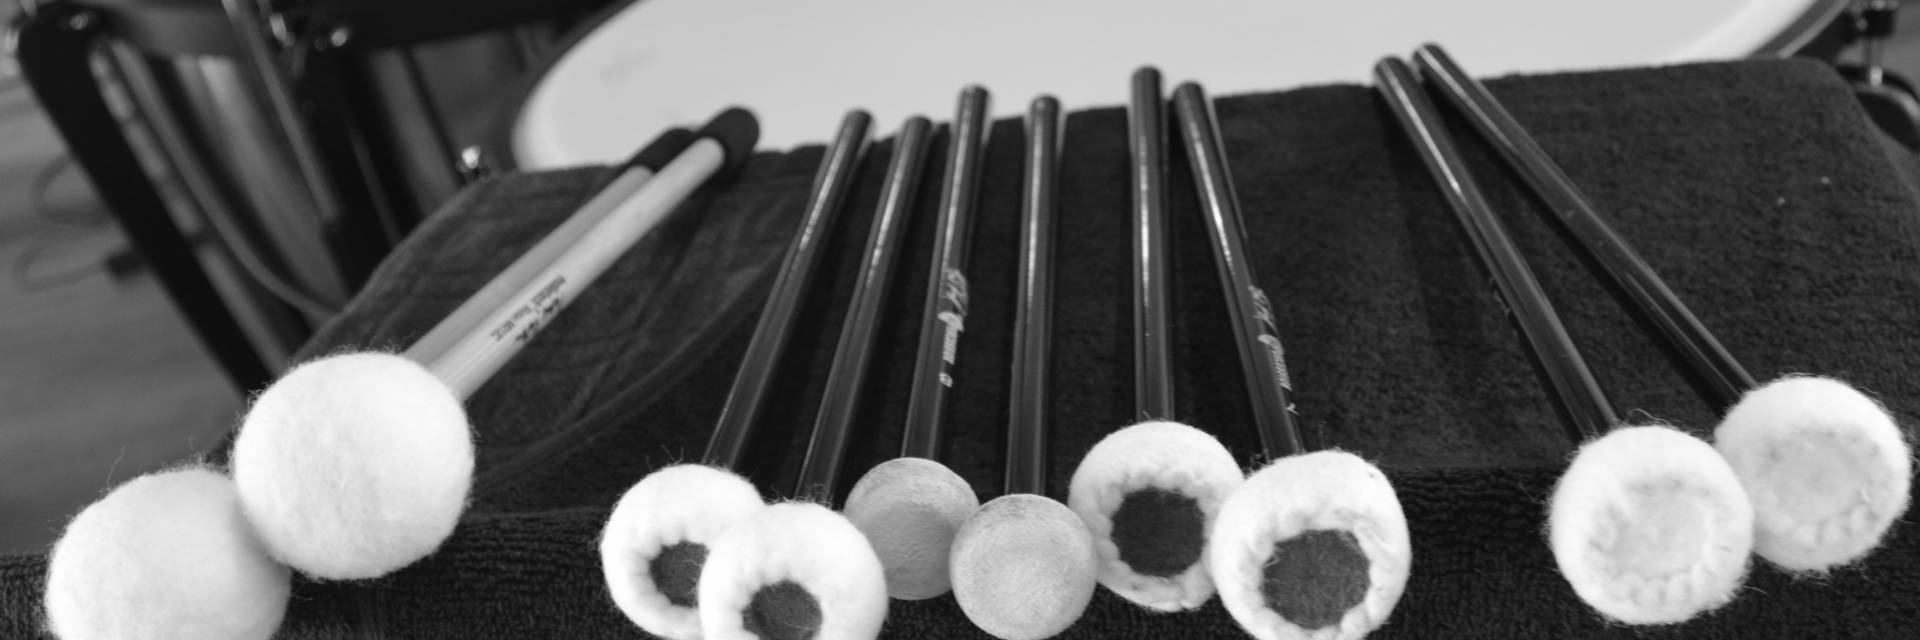 Image: Percussion mallets lying on stand in front of timpani (kettle drums)